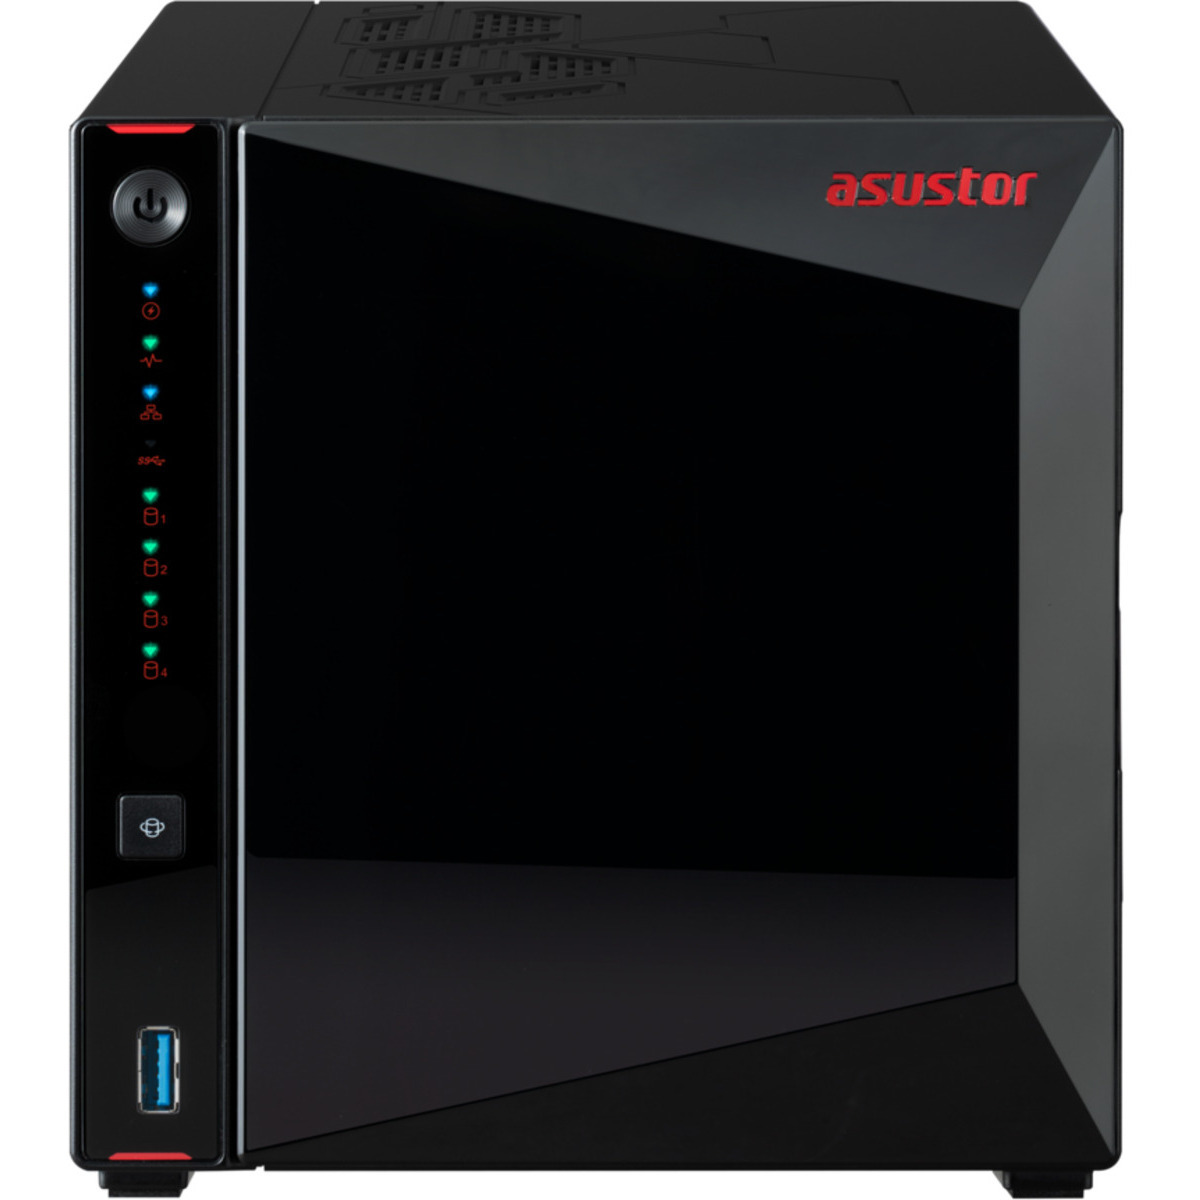 ASUSTOR Nimbustor 4 Gen2 AS5404T 36tb 4-Bay Desktop Multimedia / Power User / Business NAS - Network Attached Storage Device 2x18tb Seagate EXOS X18 ST18000NM000J 3.5 7200rpm SATA 6Gb/s HDD ENTERPRISE Class Drives Installed - Burn-In Tested - FREE RAM UPGRADE Nimbustor 4 Gen2 AS5404T